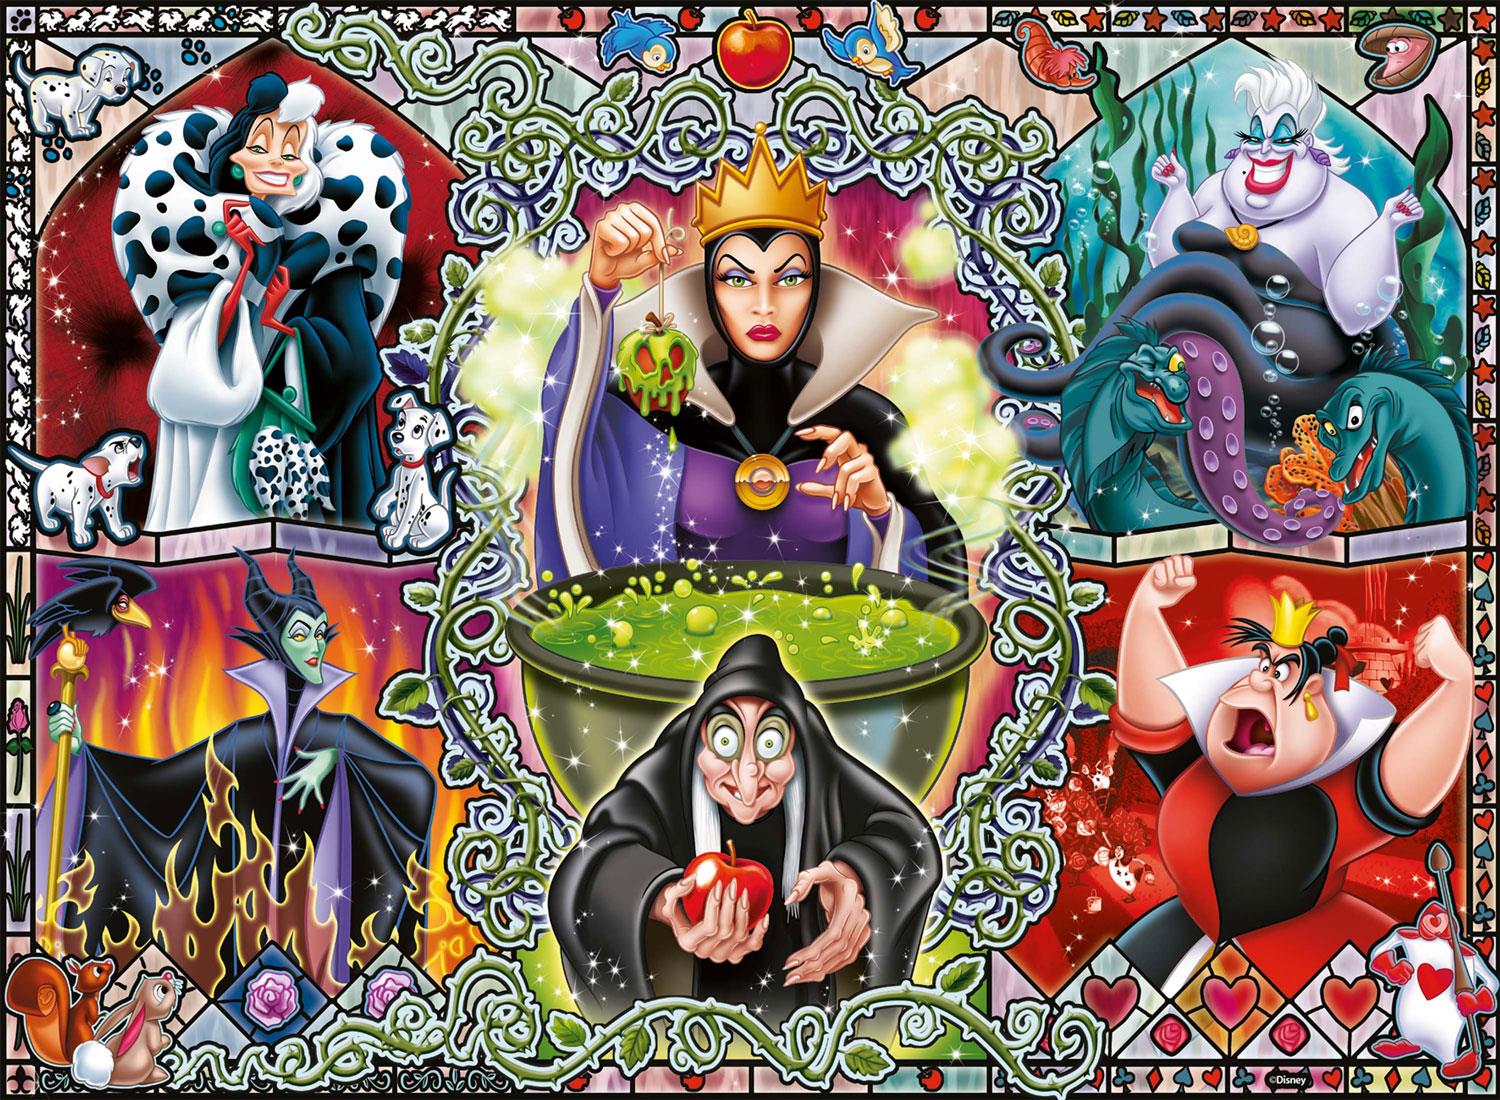 Ravensburger Disney Wicked Women Jigsaw Puzzle (1000 Pieces)